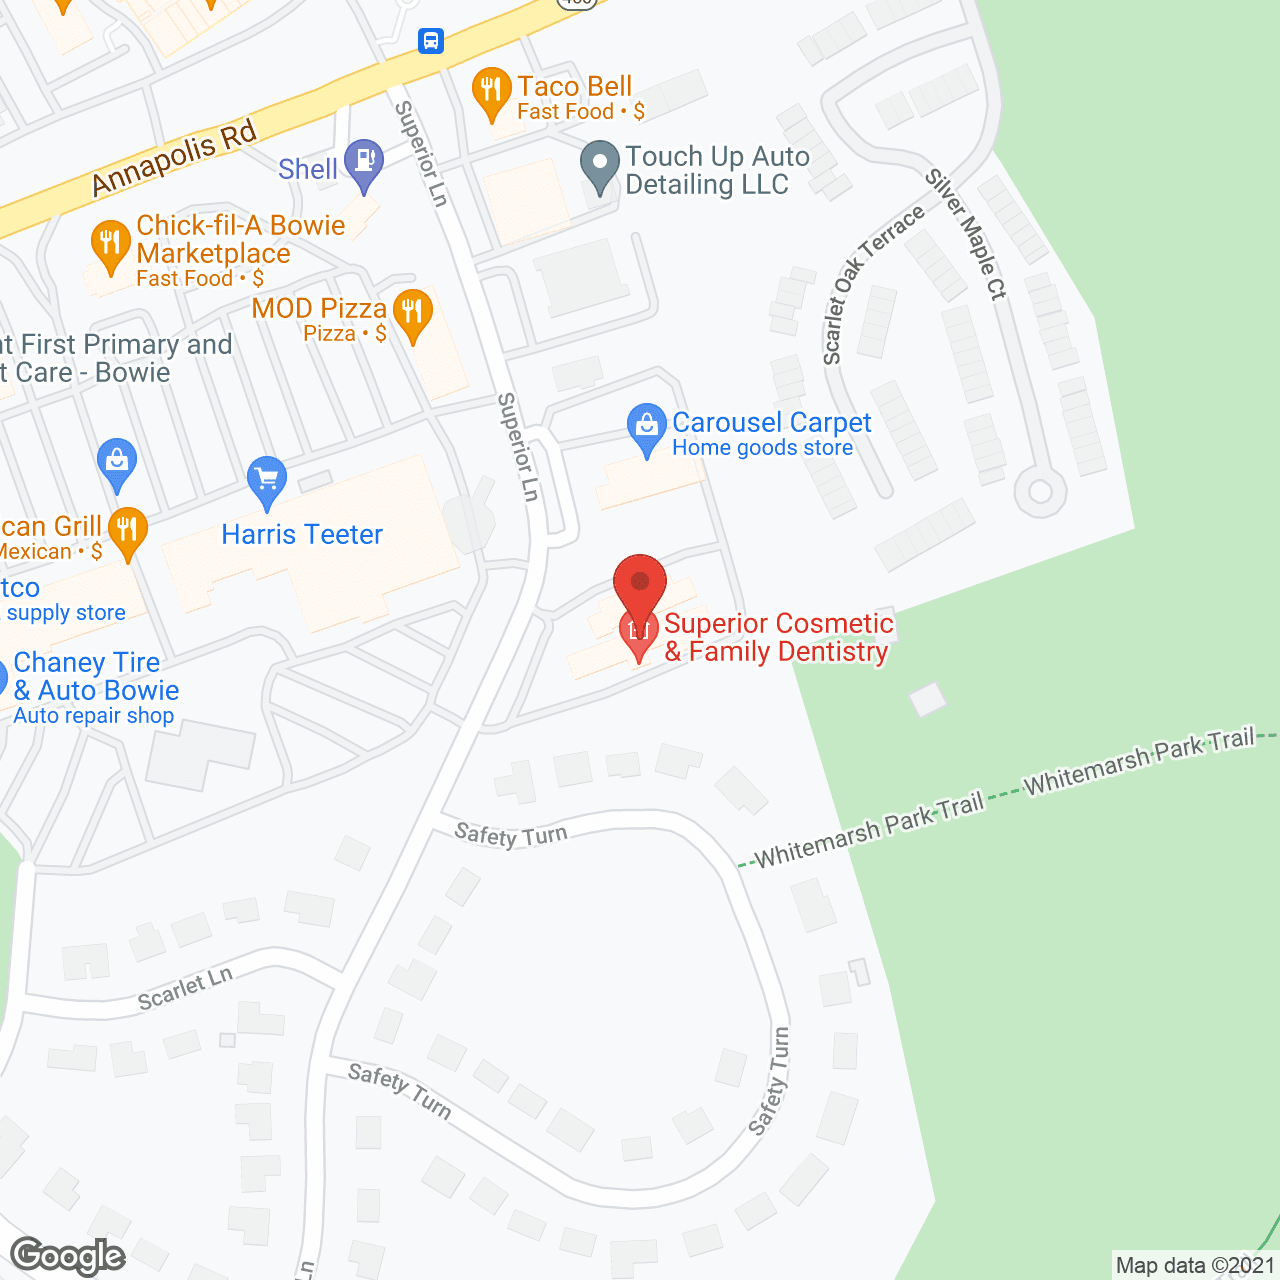 Pure Heart Care Providers in google map